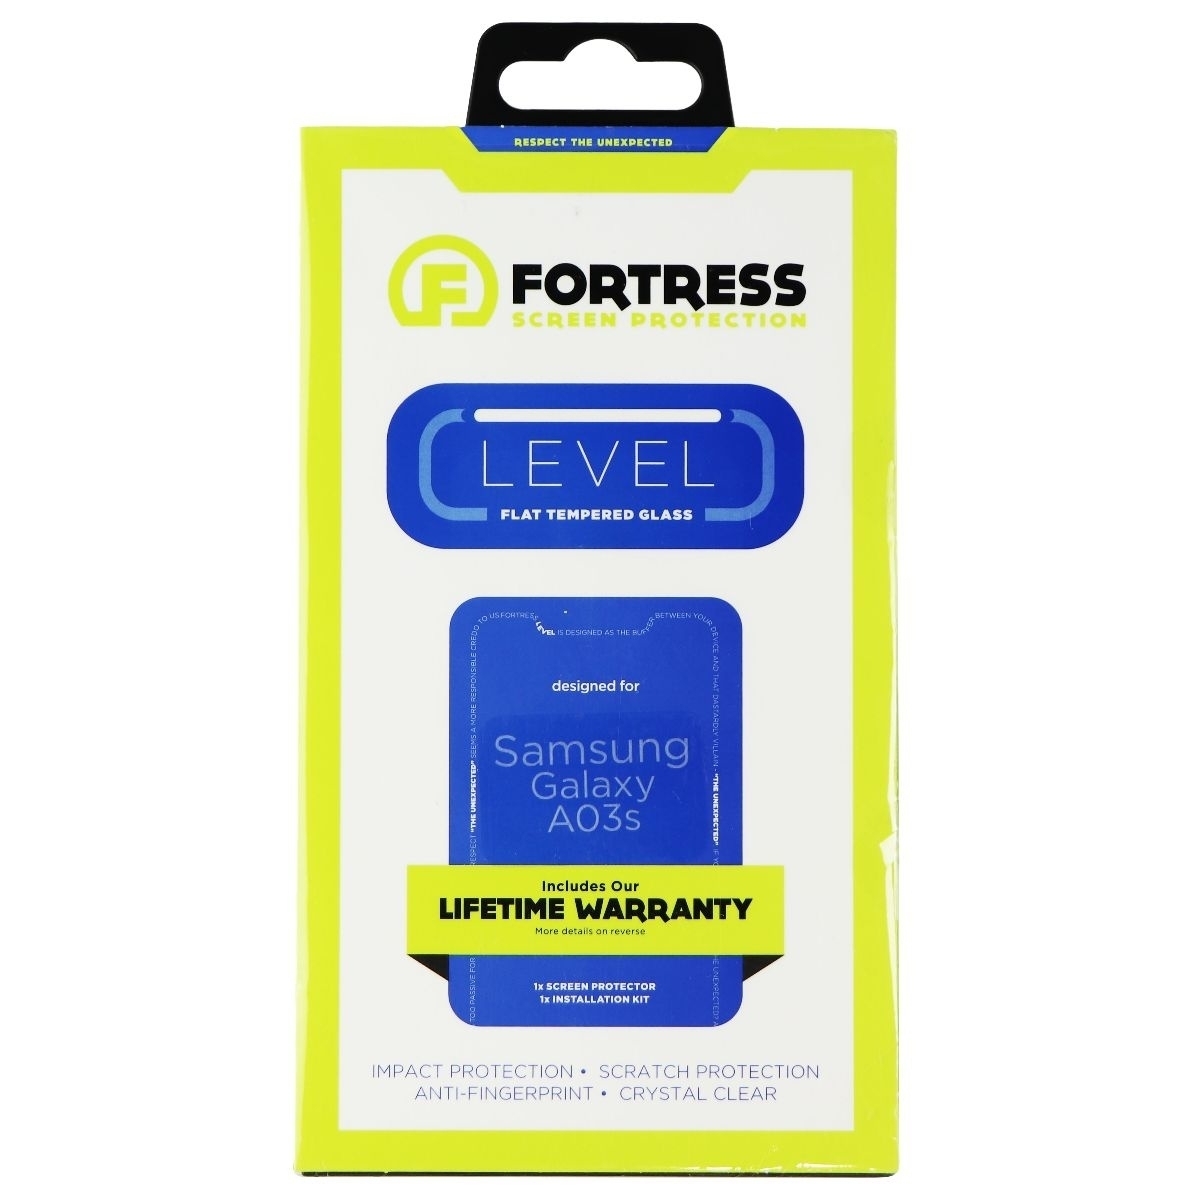 Fortress Level Tempered Glass Screen Protector For Samsung Galaxy A03s - Clear